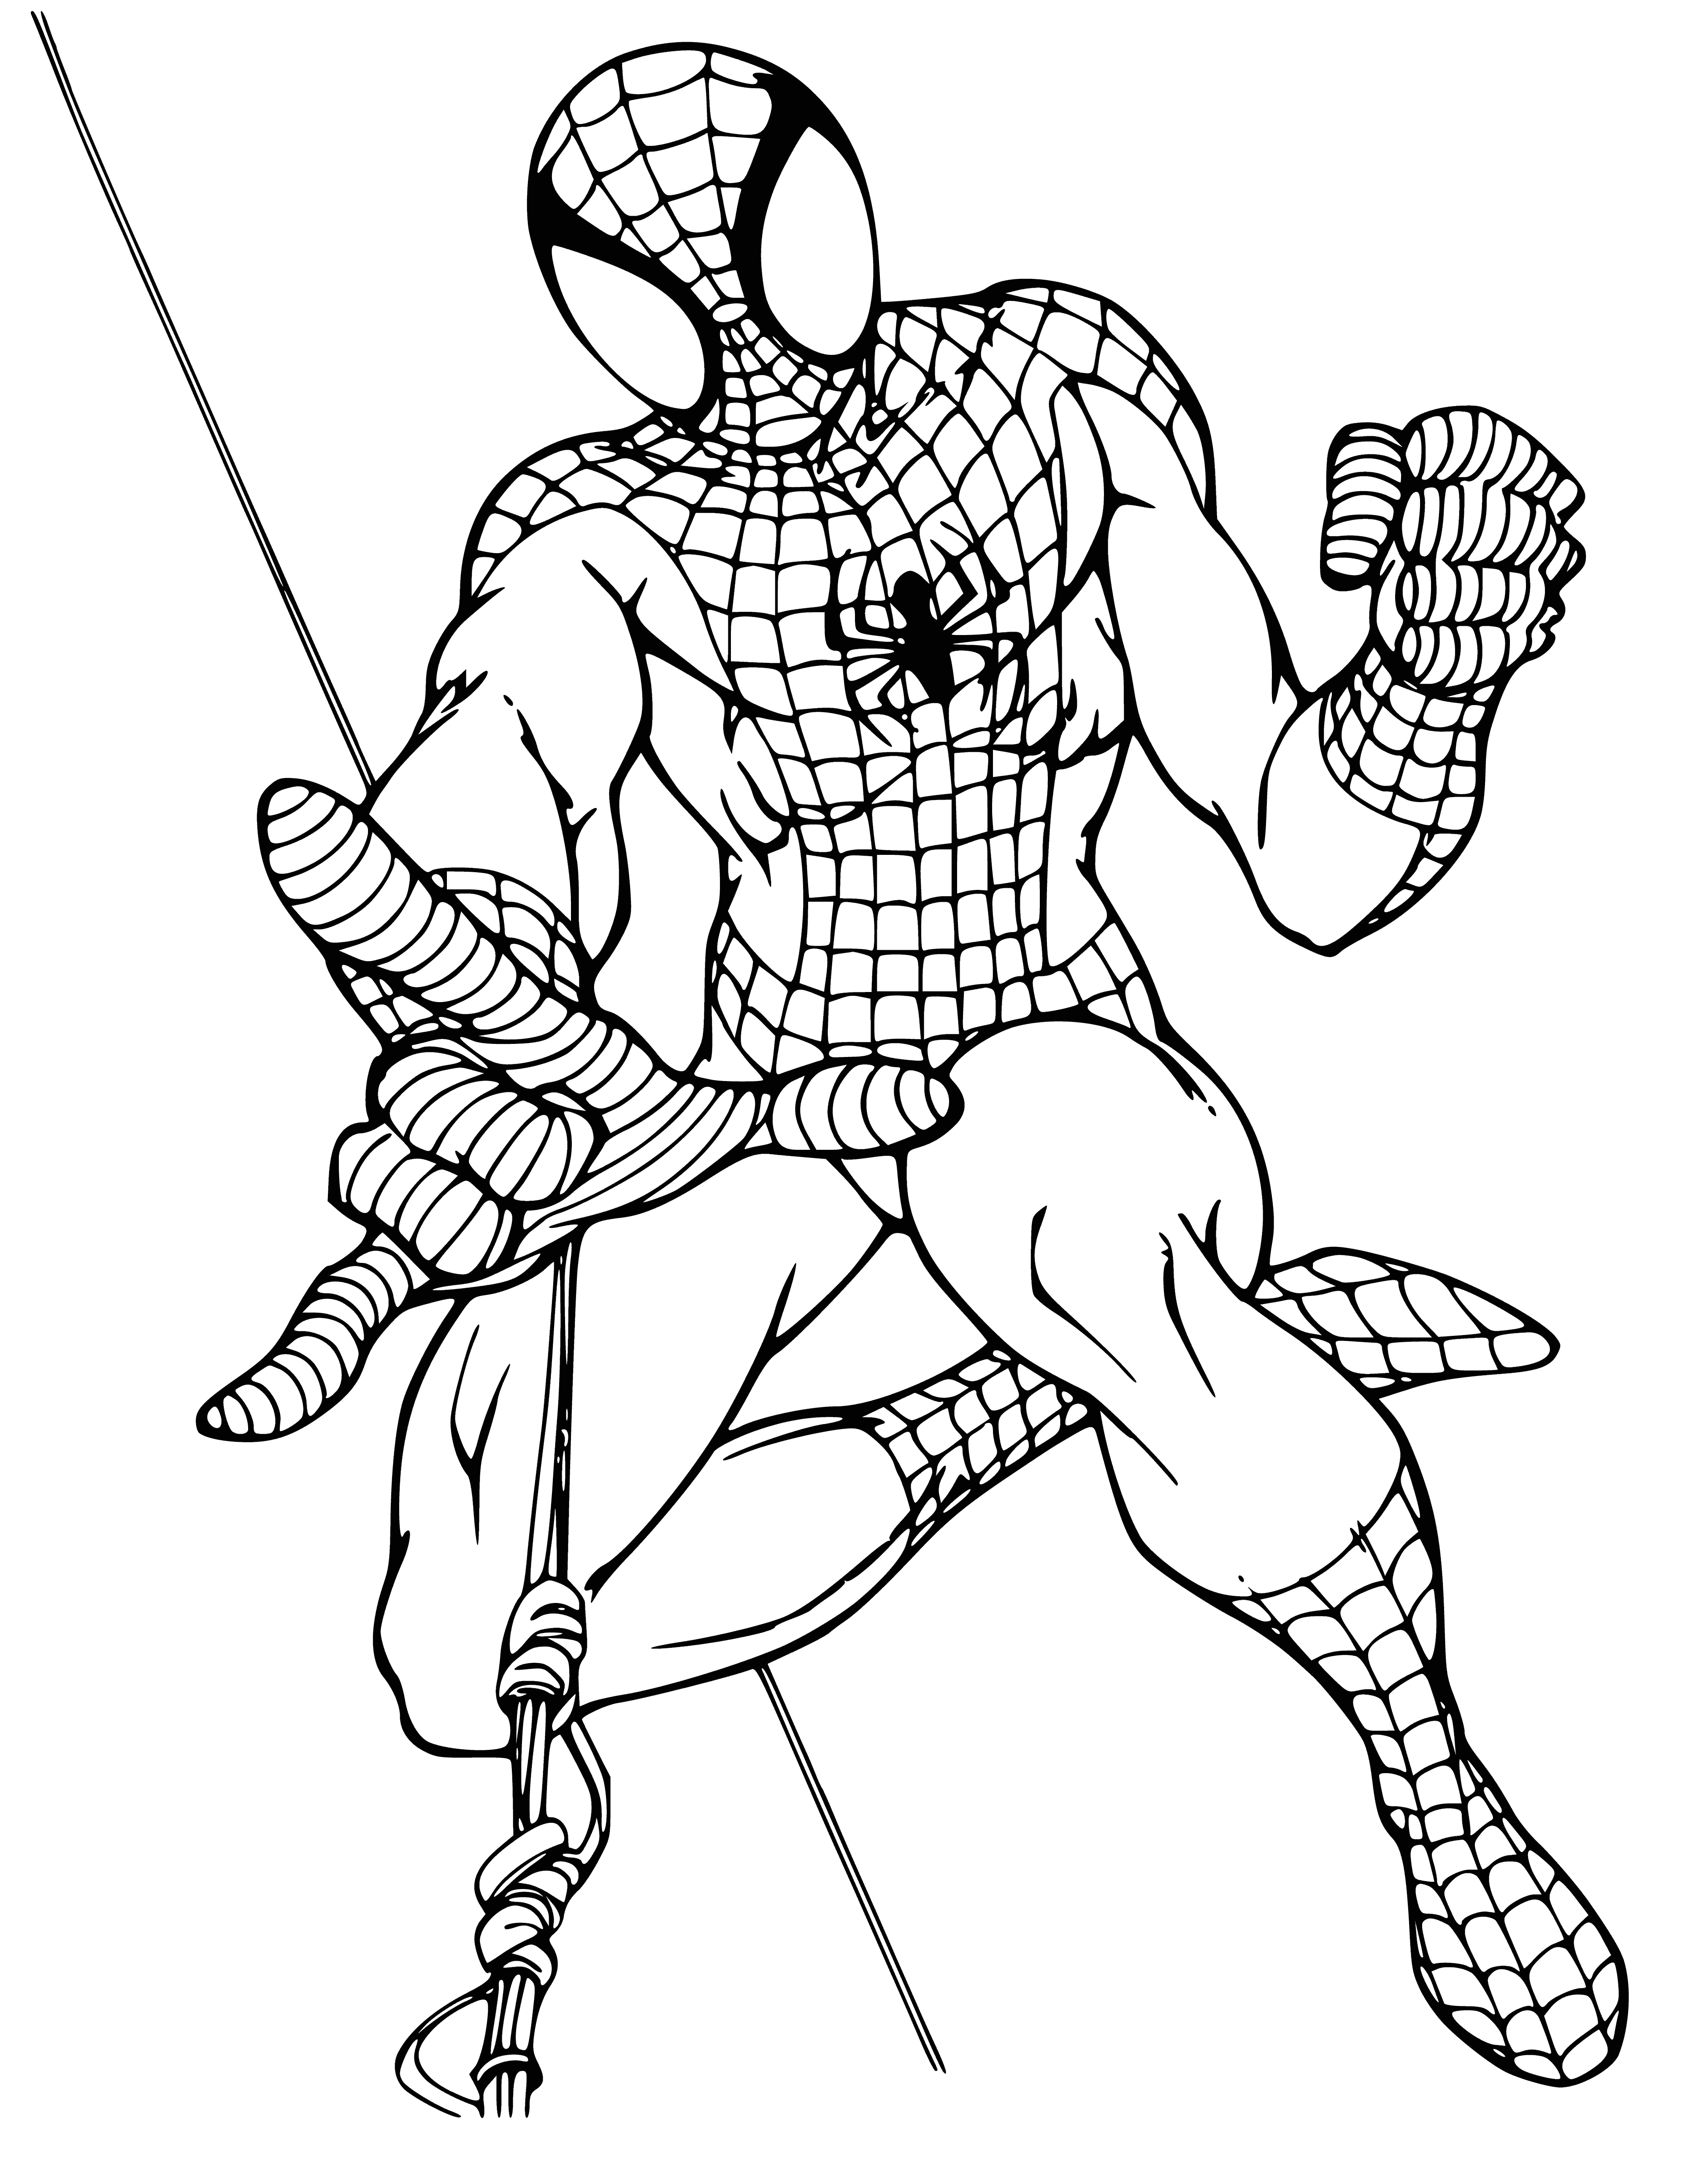 coloring page: Spiderman fights crime in a red and blue suit with a spider web design and a red mask with big white eyes.